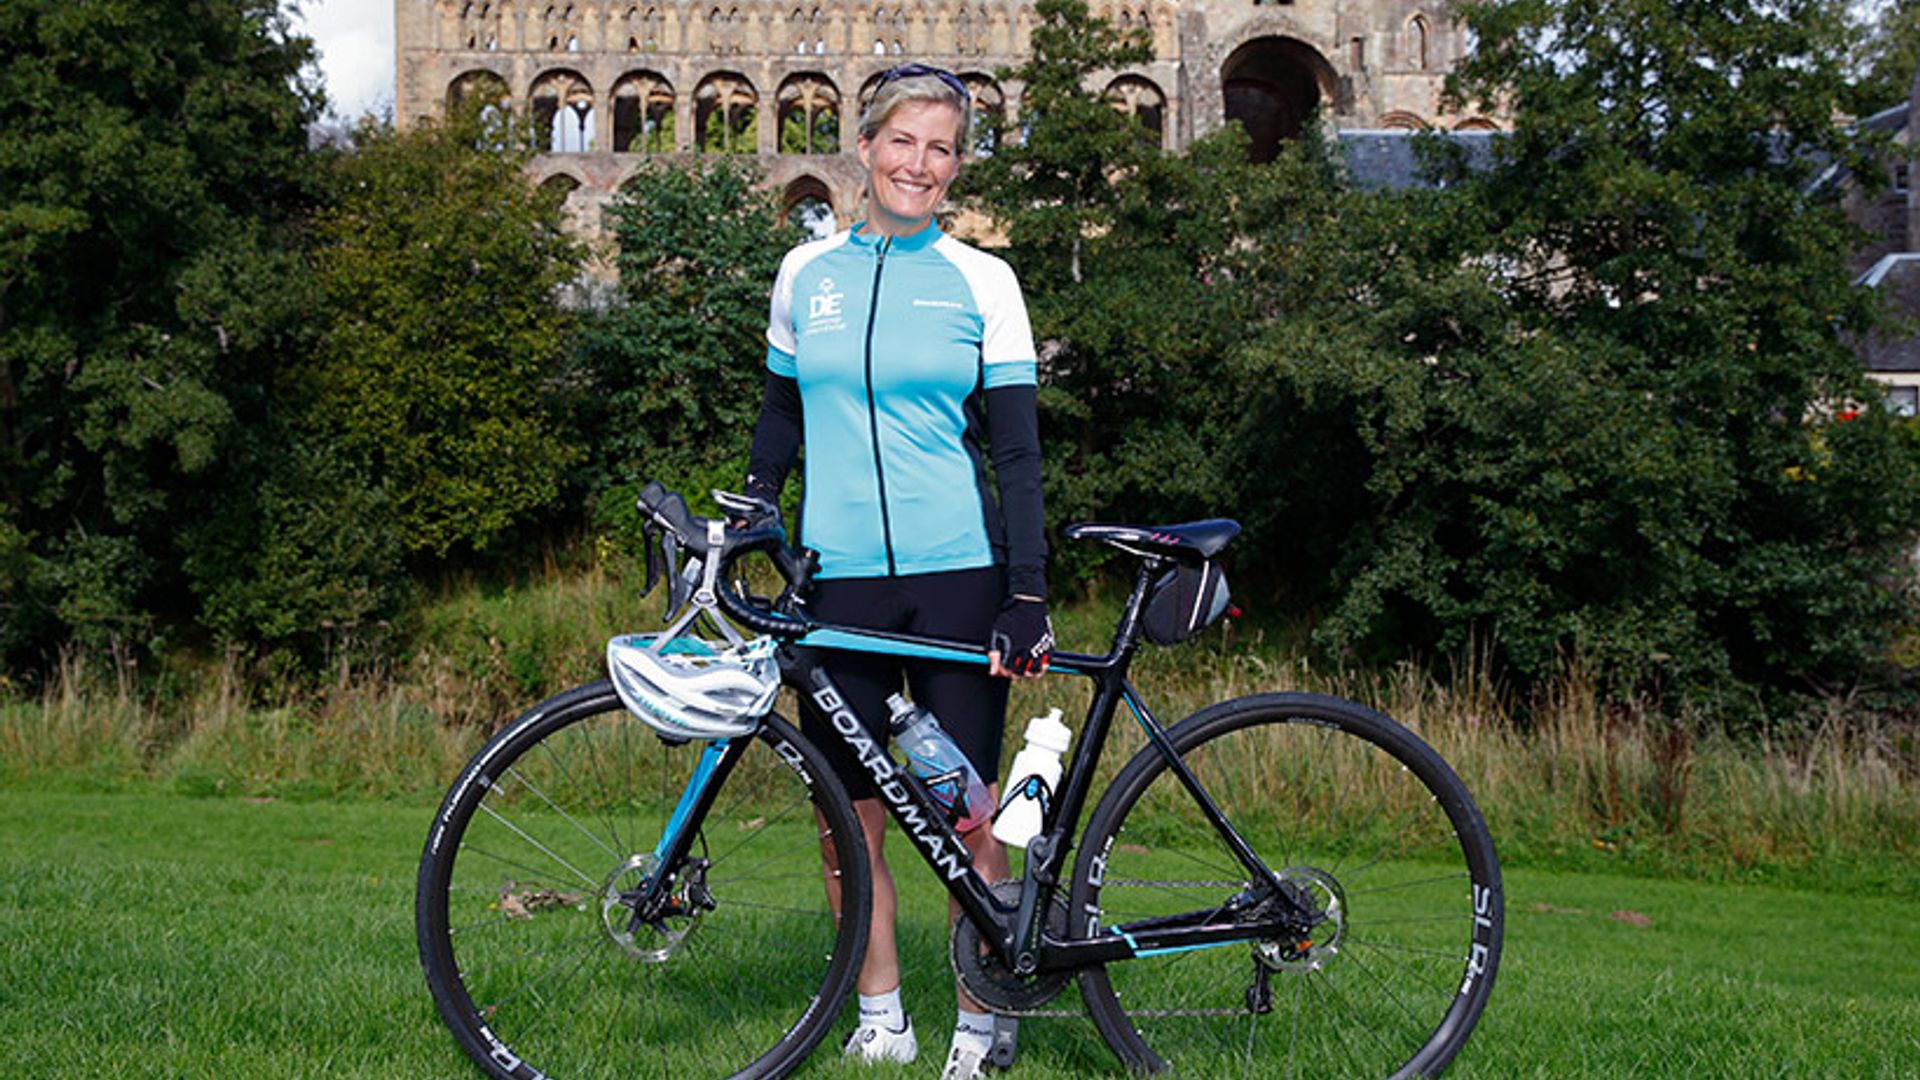 Sophie Wessex embarks on her 445 mile cycle ride: 'The Queen thinks I'm crazy'